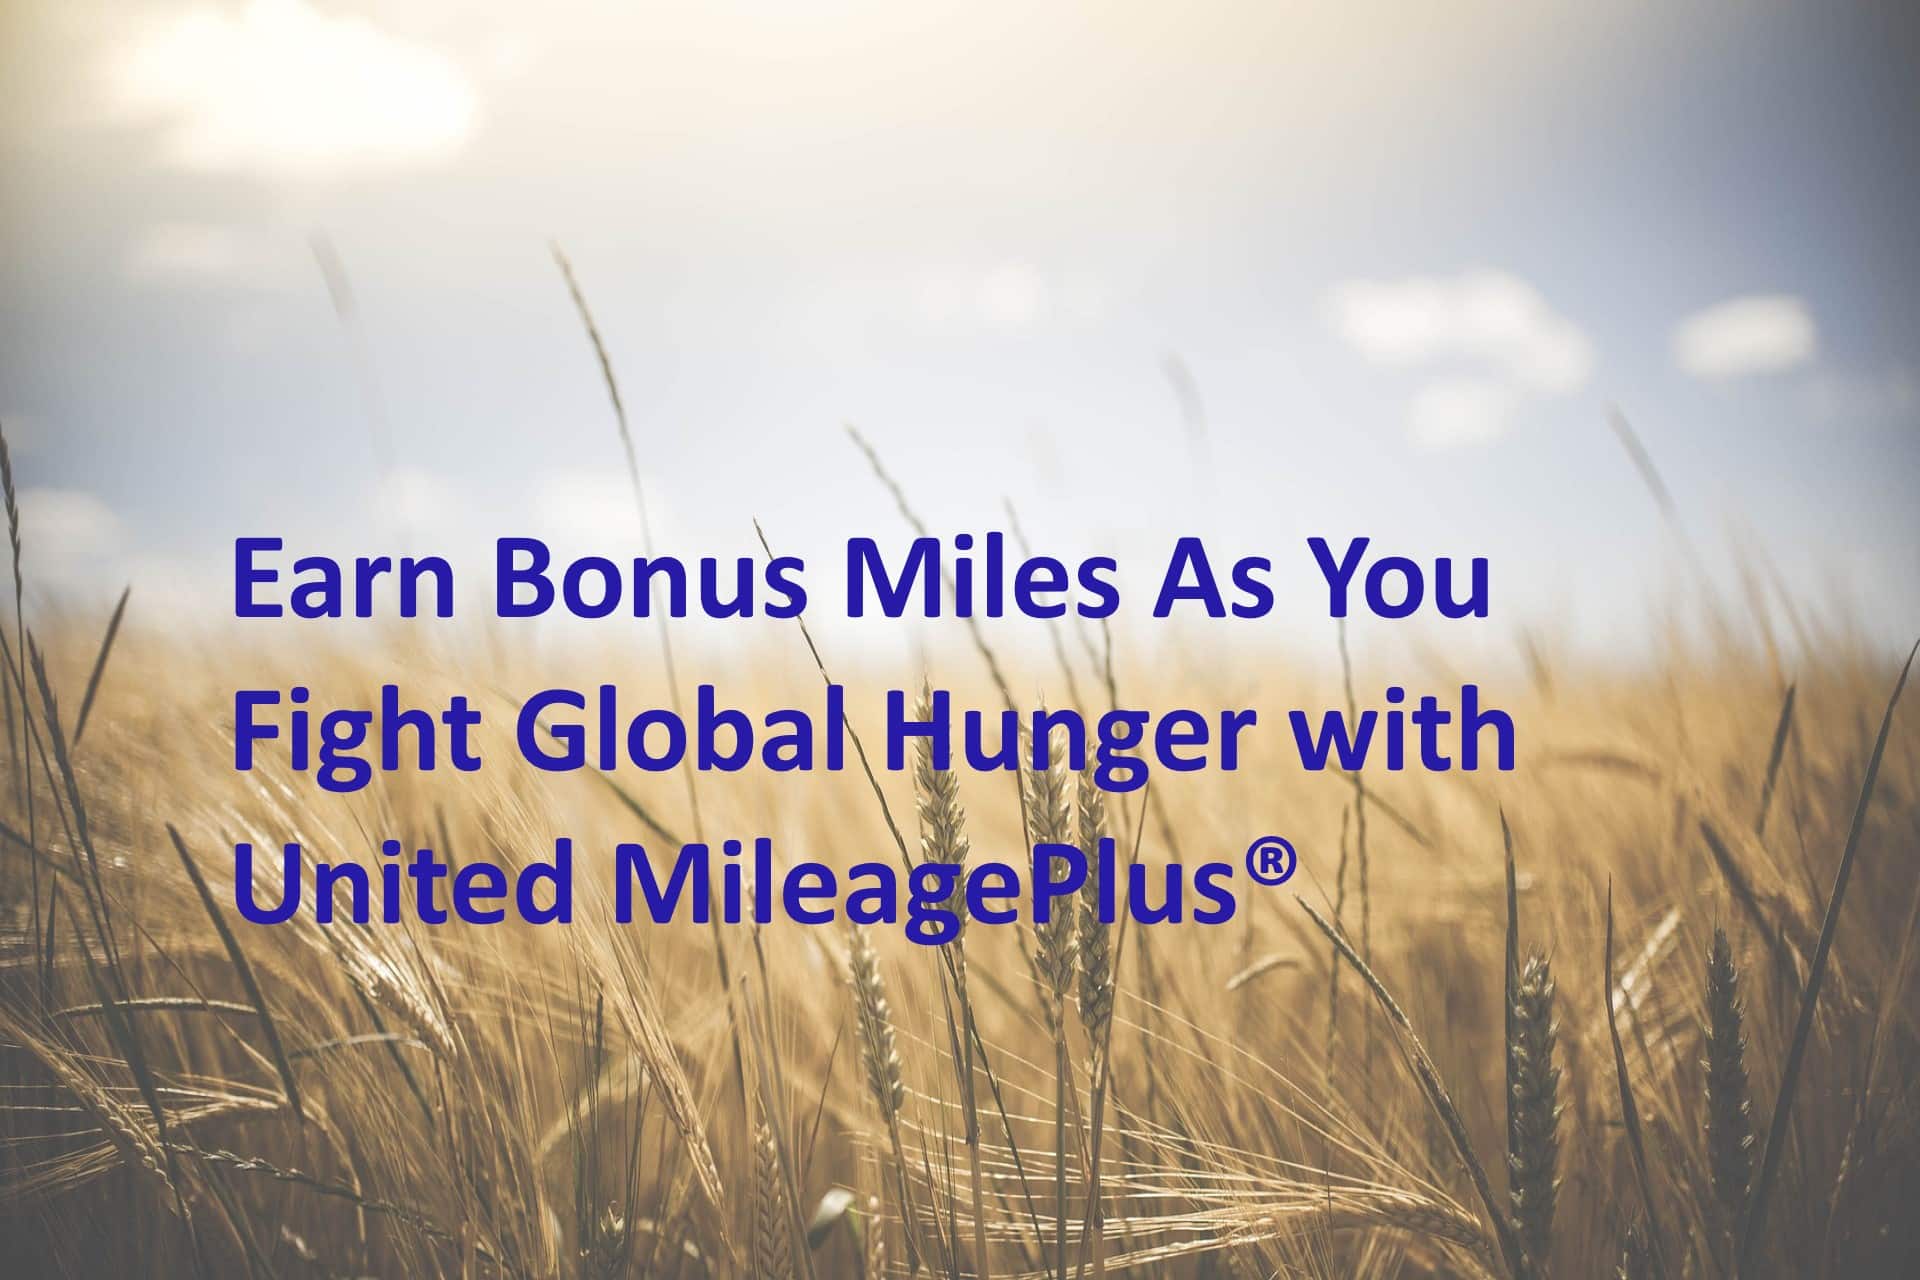 United Airlines Offering Bonus Miles for World Food Day